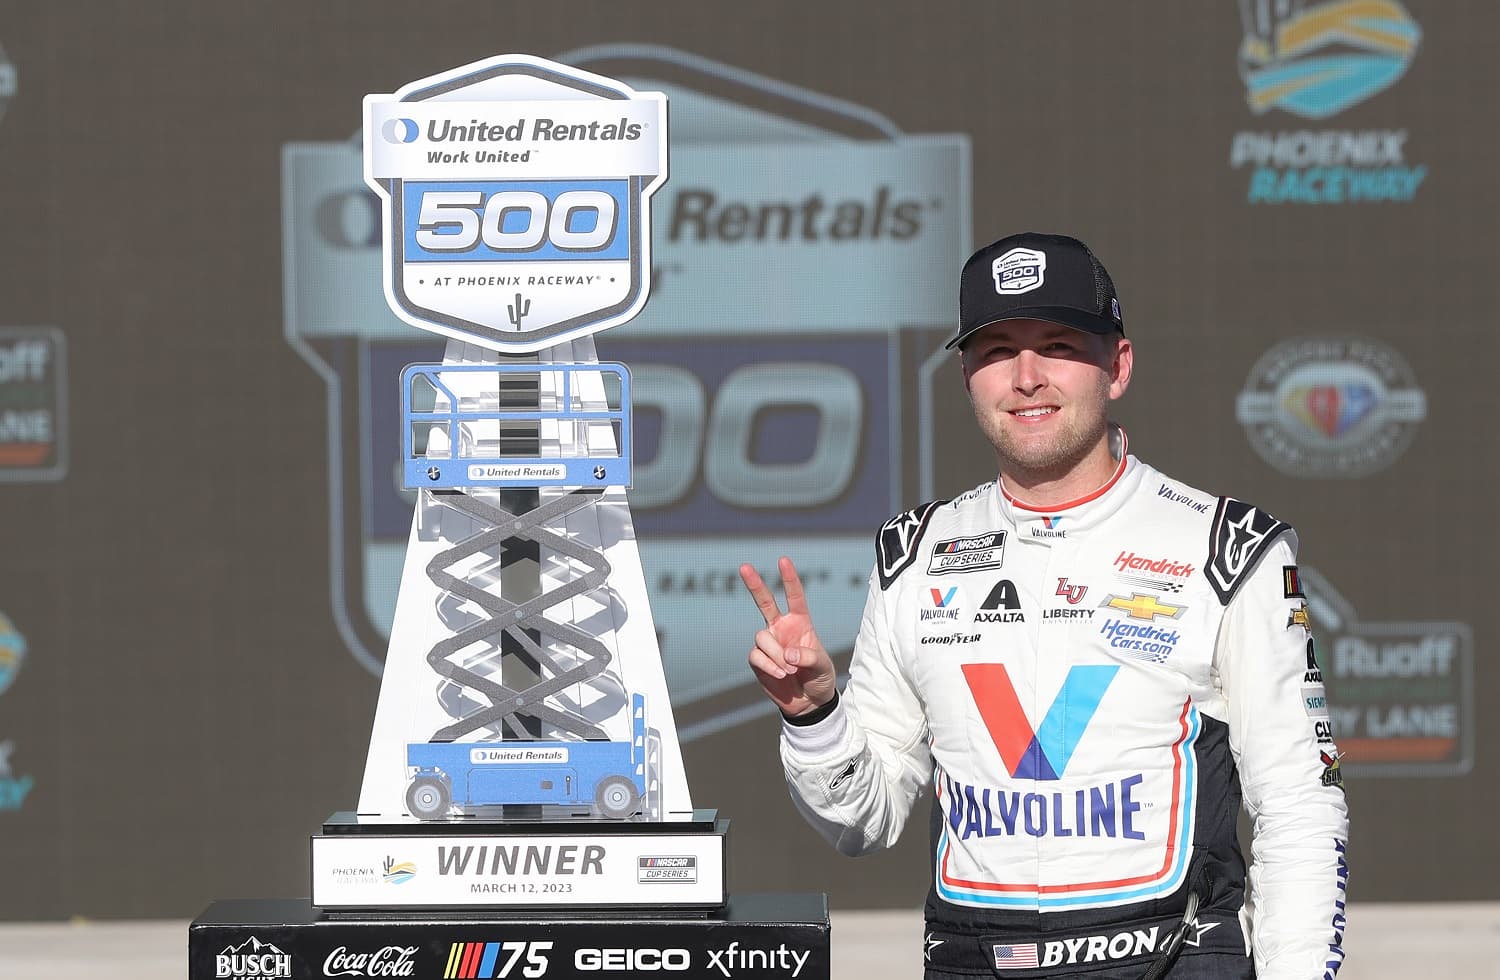 William Byron celebrates after winning the NASCAR Cup Series United Rentals Work United 500 at Phoenix Raceway on March 12, 2023.